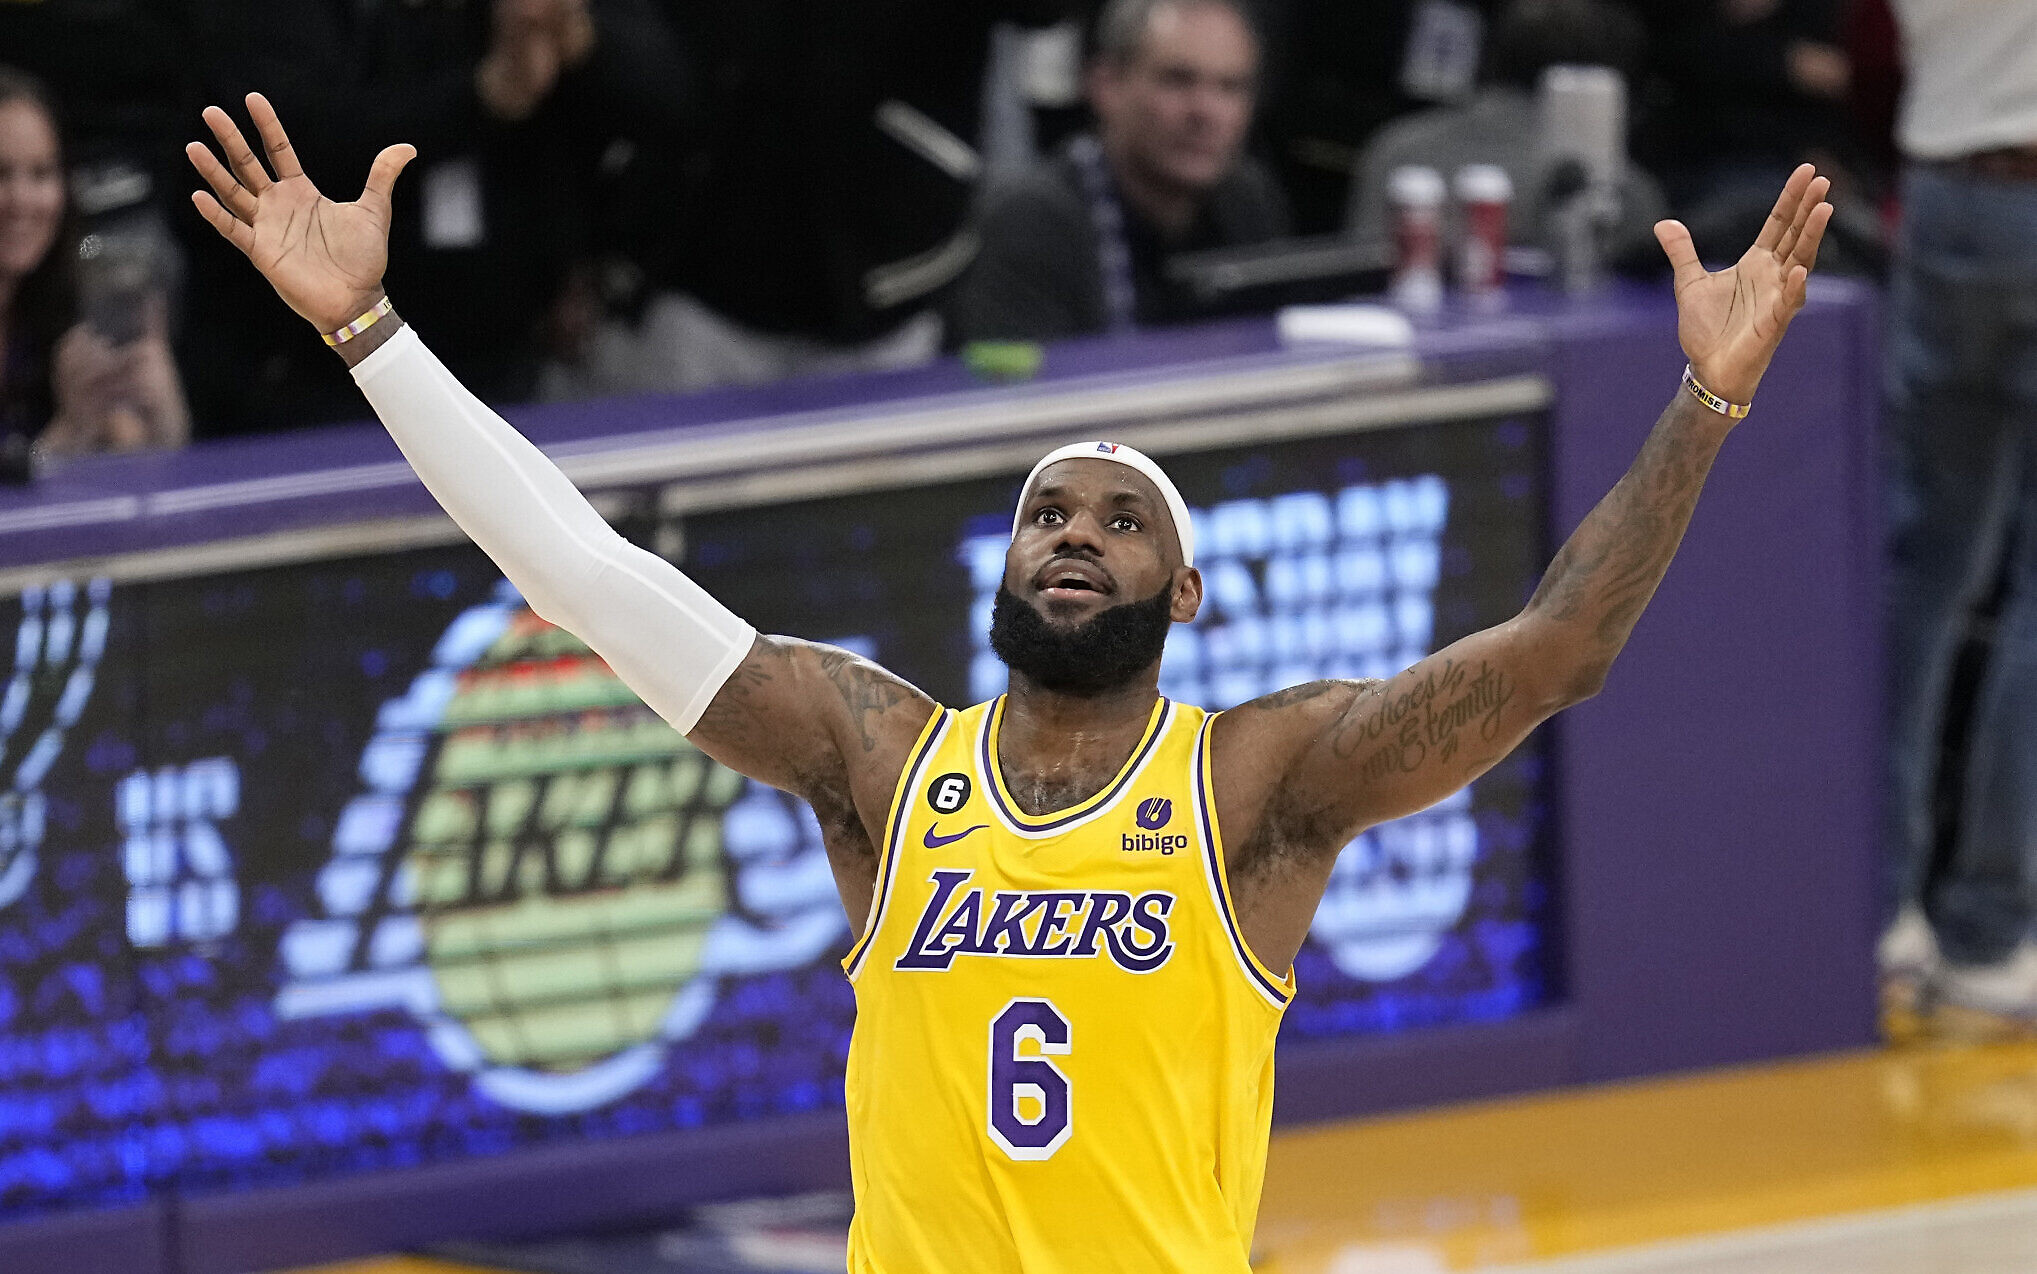 Epic Showdown: Steph Curry's Record Night and LeBron's Winning Free Throws in Warriors-Lakers Thriller